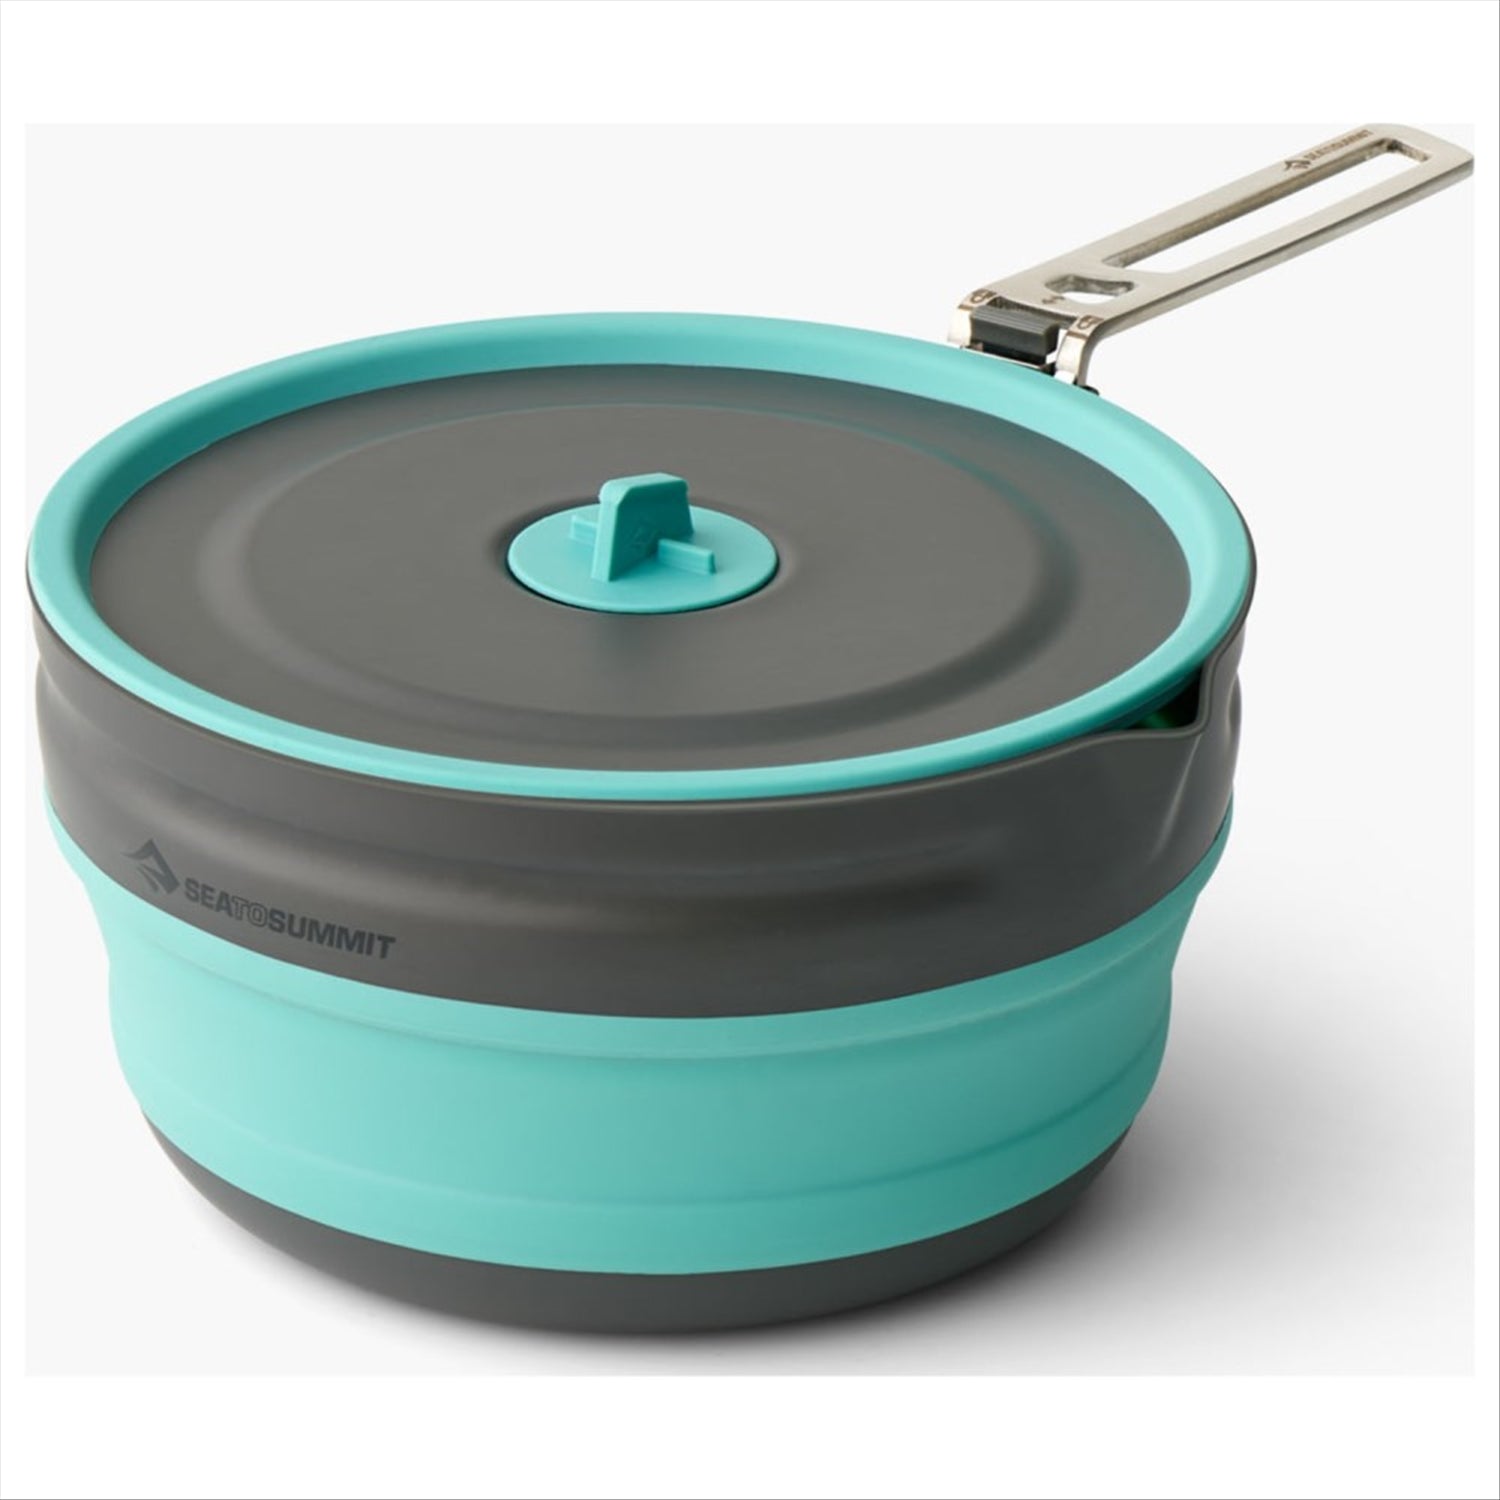 Sea to Summit Sea To Summit Frontier Collapsible Pouring Pot - 2.2L